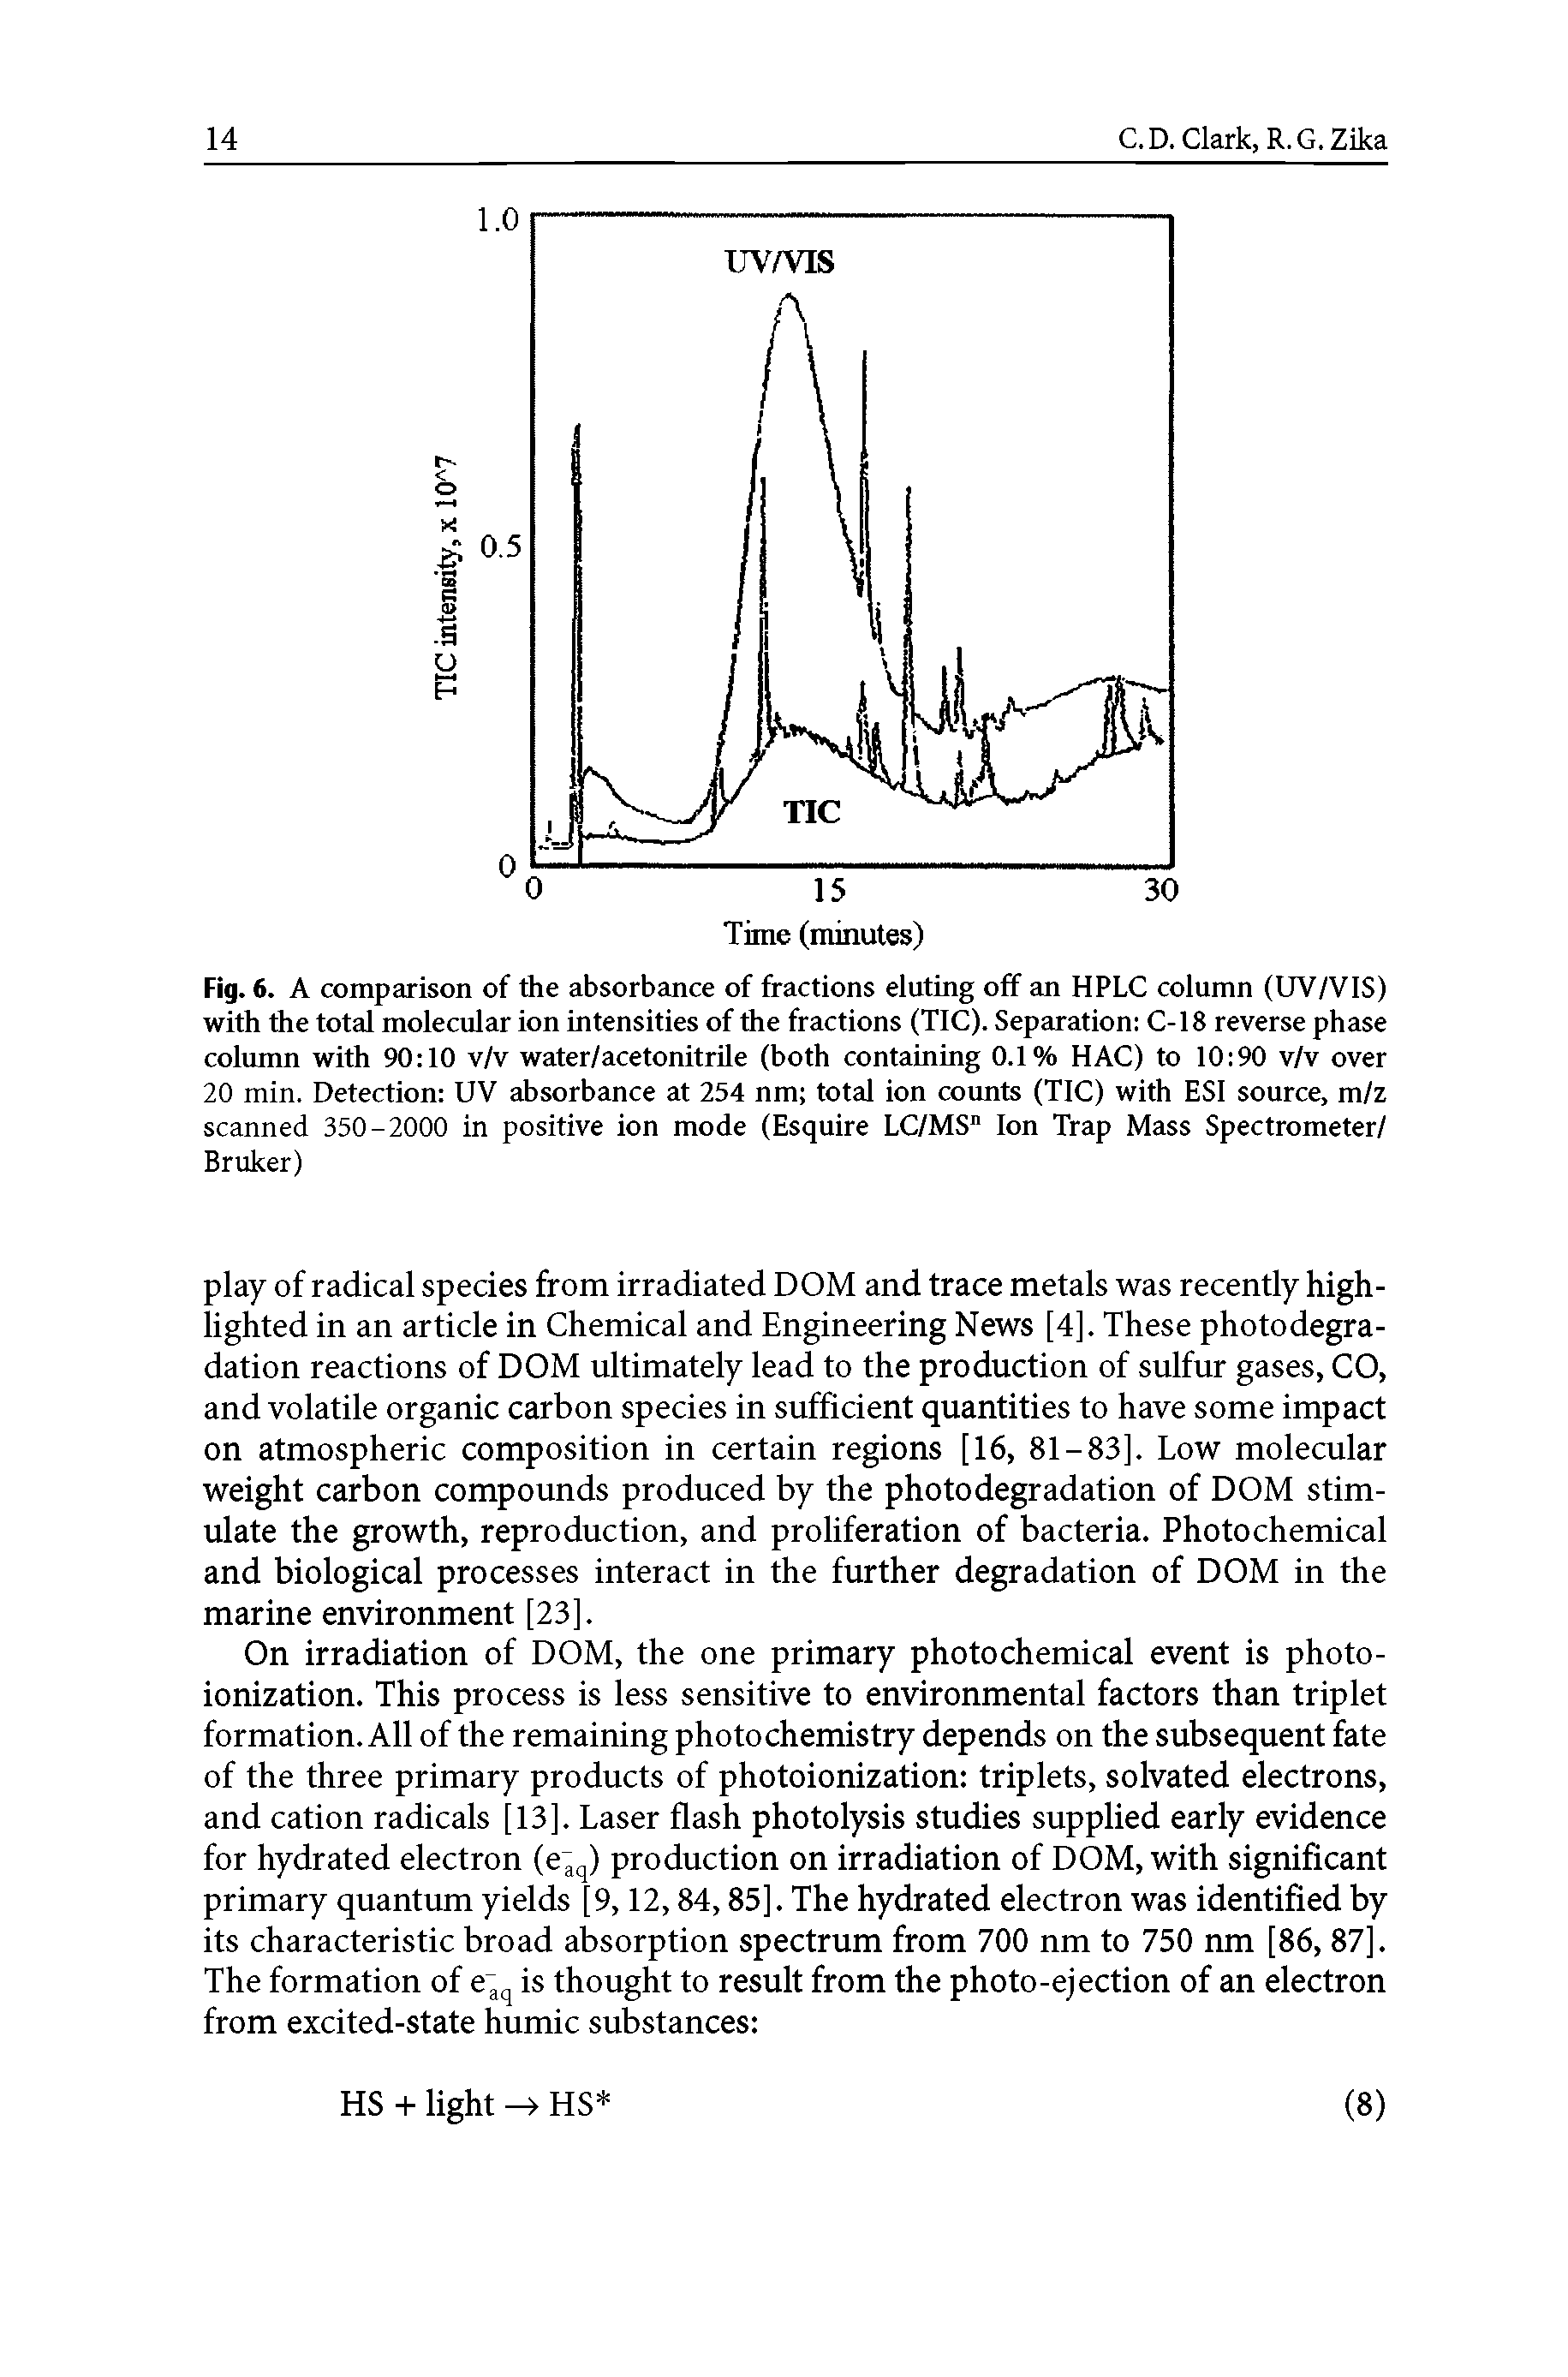 Fig. 6. A comparison of the absorbance of fractions eluting off an HPLC column (UV/VIS) with the total molecular ion intensities of the fractions (TIC). Separation C-18 reverse phase colrnnn with 90 10 v/v water/acetonitrile (both containing 0.1% HAC) to 10 90 v/v over 20 min. Detection UV absorbance at 254 nm total ion coimts (TIC) with ESI source, m/z scanned 350-2000 in positive ion mode (Esquire LC/MS Ion Trap Mass Spectrometer/ Bruker)...